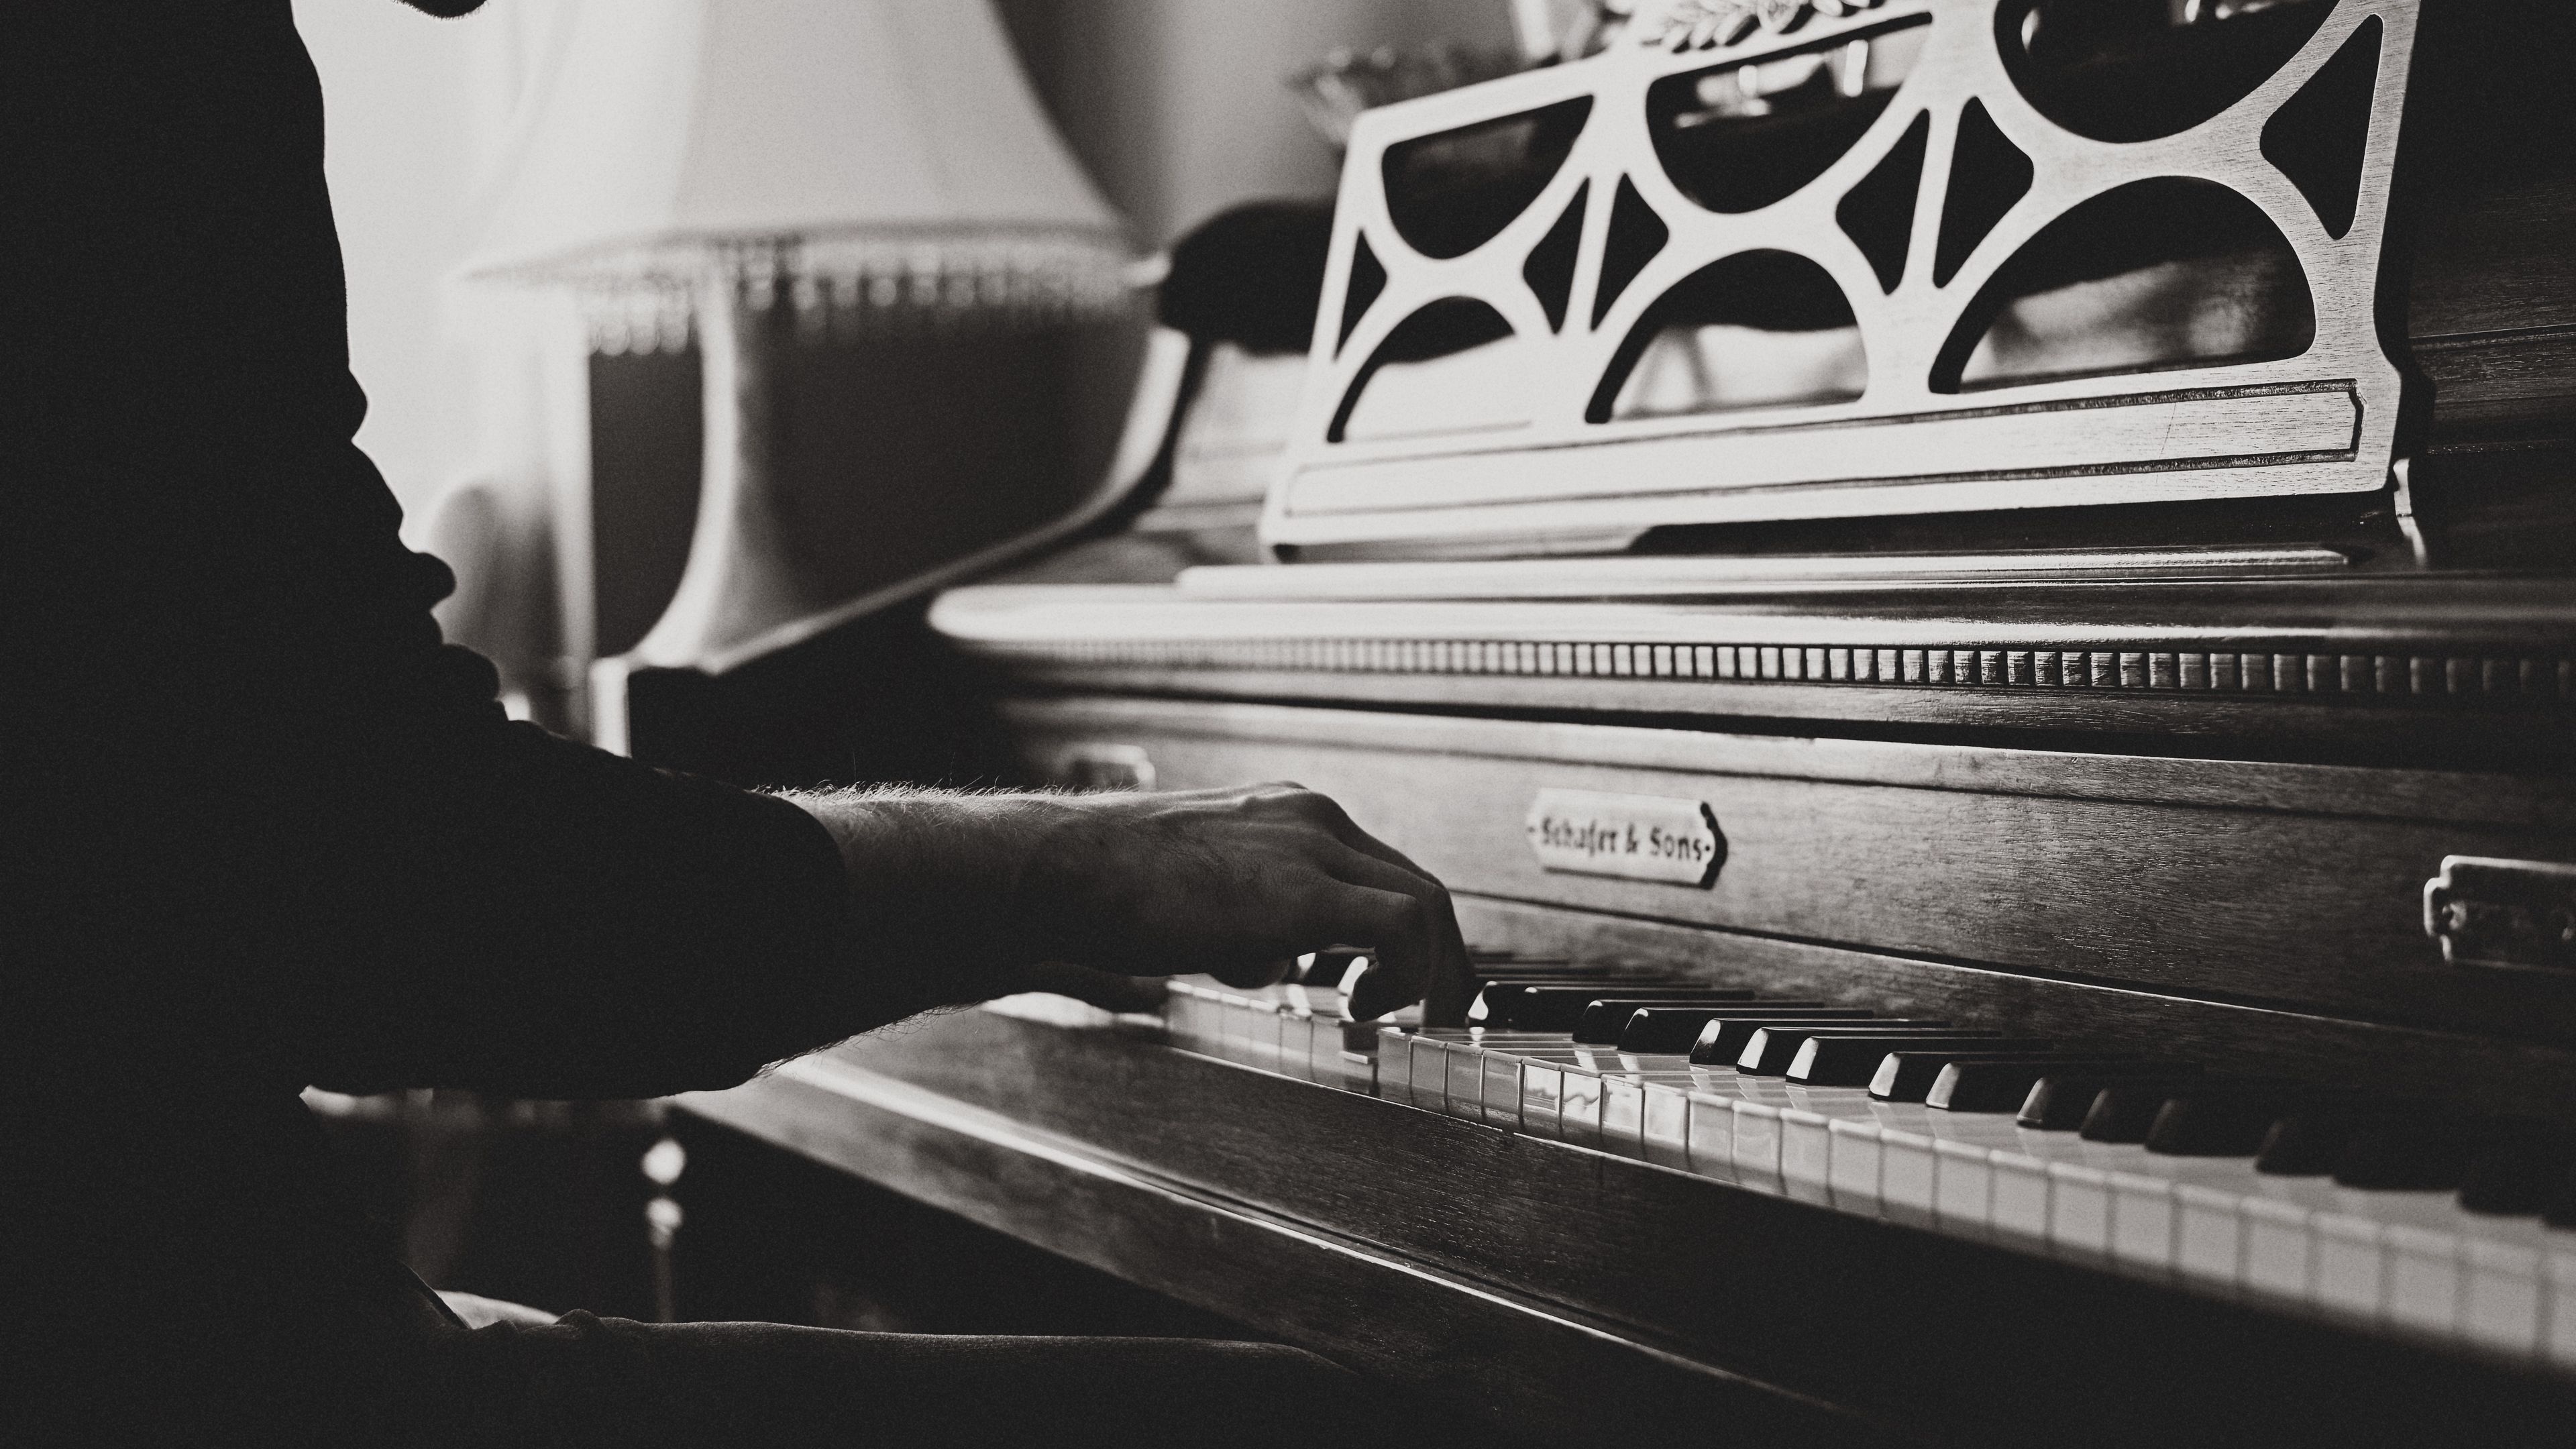 Piano: Schwartz And Sons, Black-And-White Vintage Aesthetic, Playing By Hands. 3840x2160 4K Wallpaper.